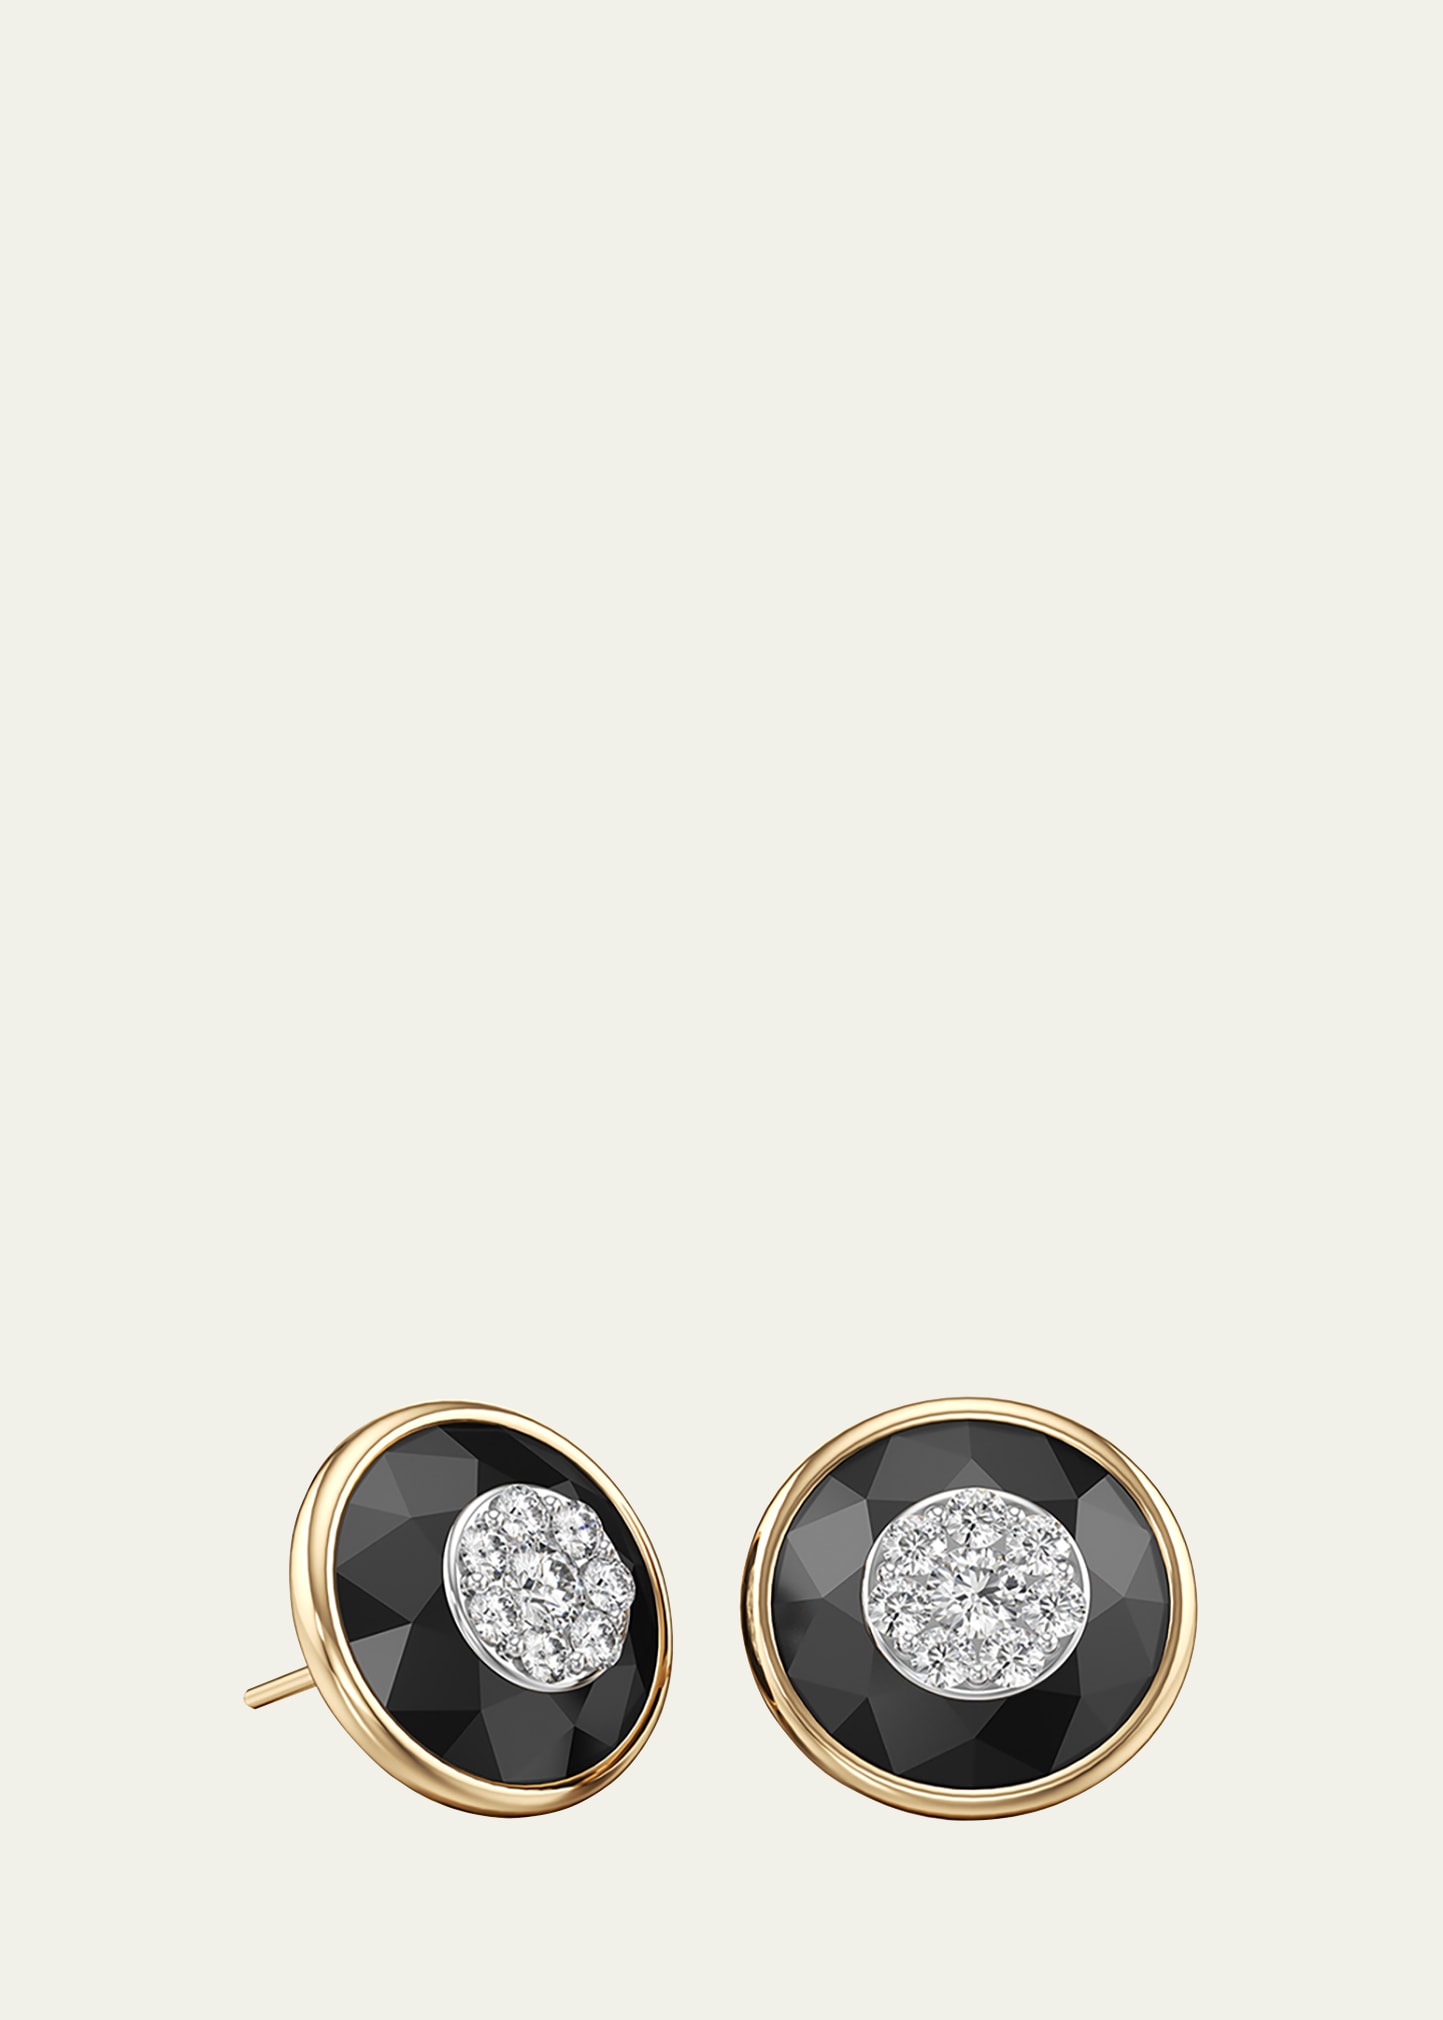 Bhansali One Collection 13mm Earrings with Yellow Gold Bezel